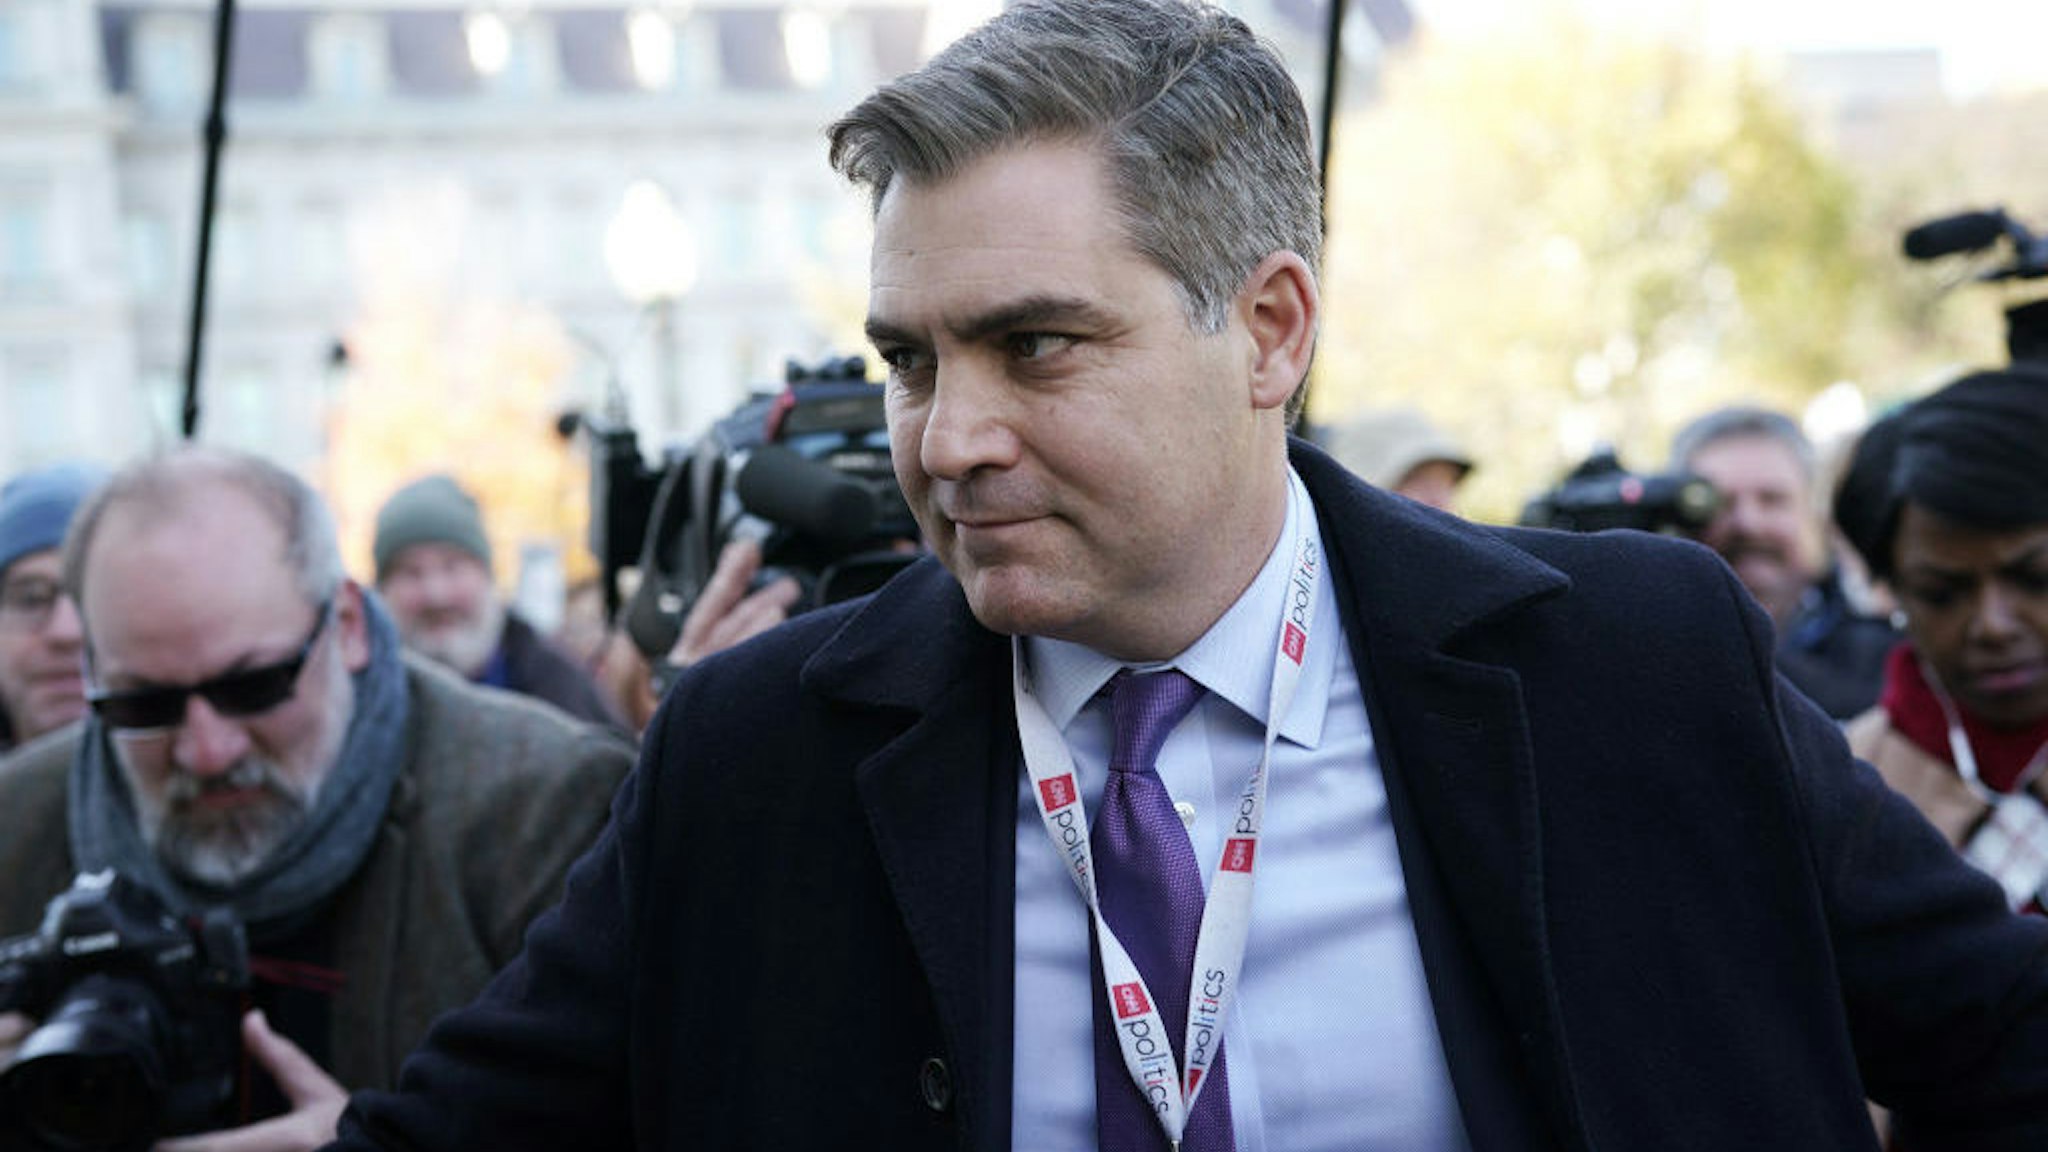 WASHINGTON, DC - NOVEMBER 16: CNN chief White House correspondent Jim Acosta returns to the White House after Federal judge Timothy J. Kelly ordered the White House to reinstate his press pass November 16, 2018 in Washington, DC. CNN has filed a lawsuit against the White House after Acosta's press pass was revoked after a dispute involving a news conference last week. (Photo by Alex Wong/Getty Images)